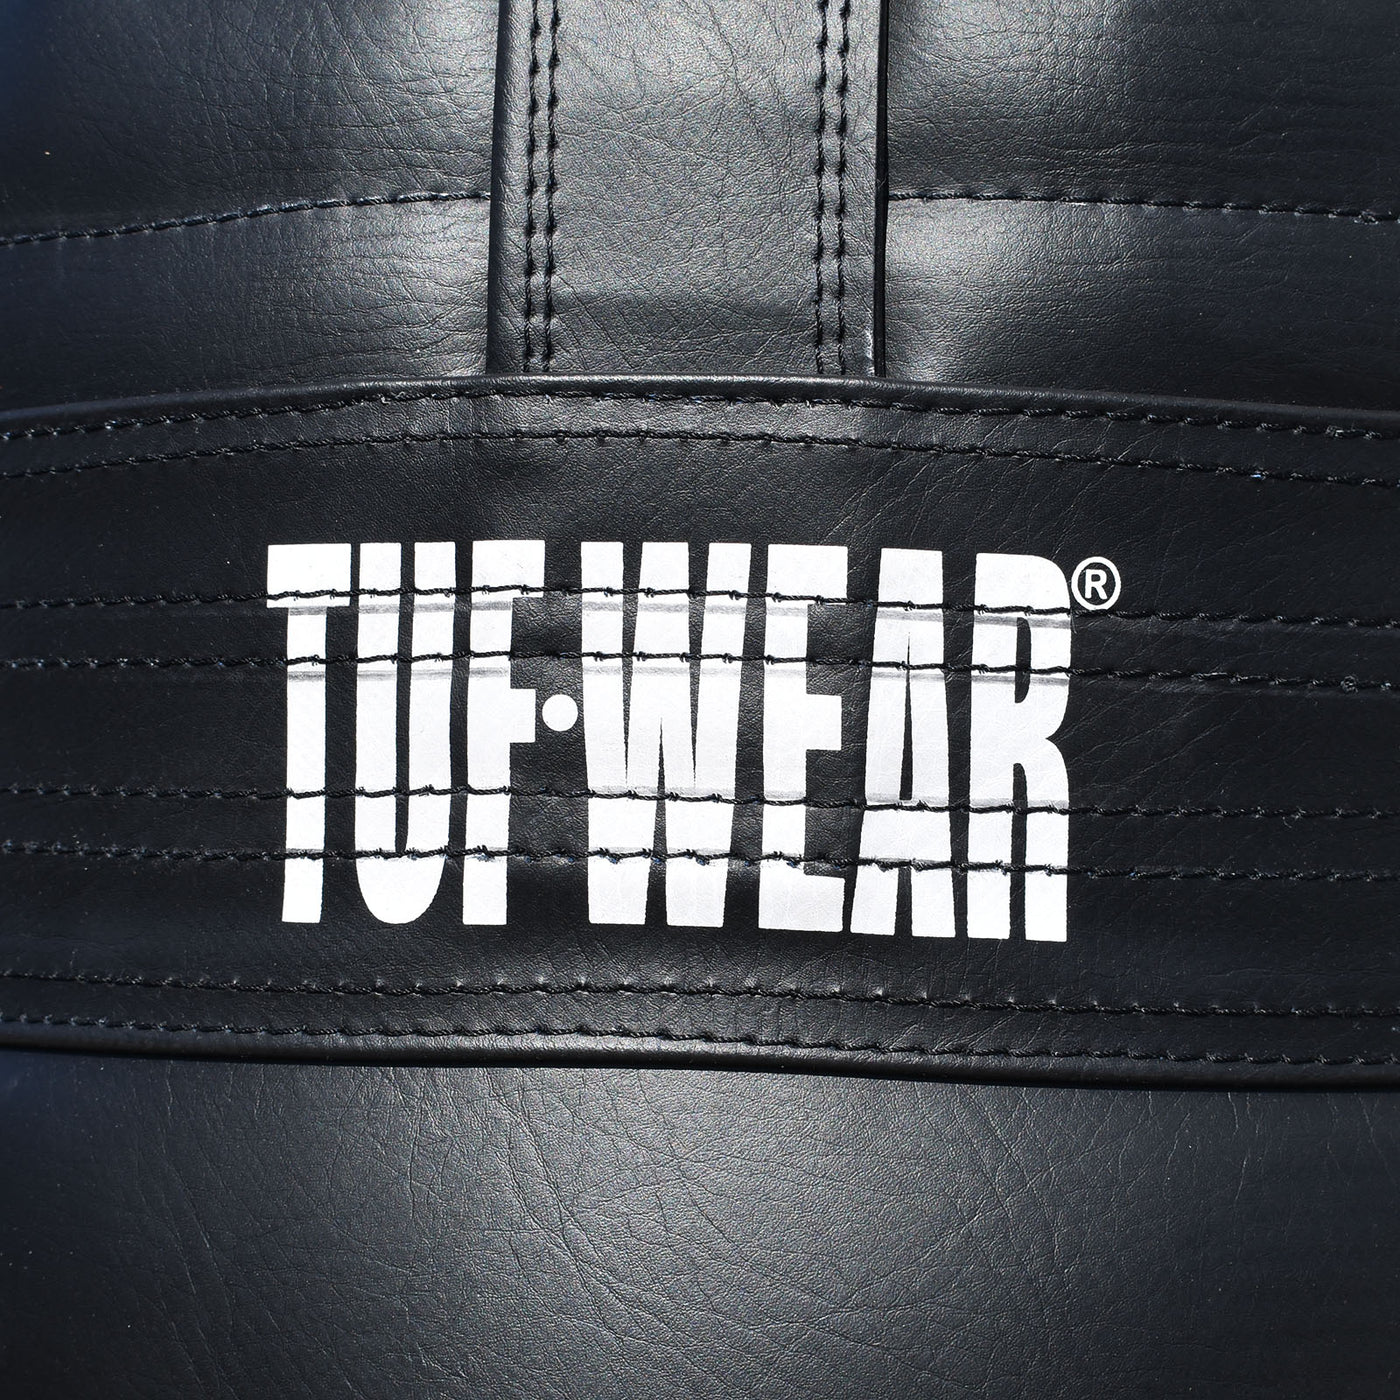 Tuf Wear Balboa 4FT Quilted Punchbag